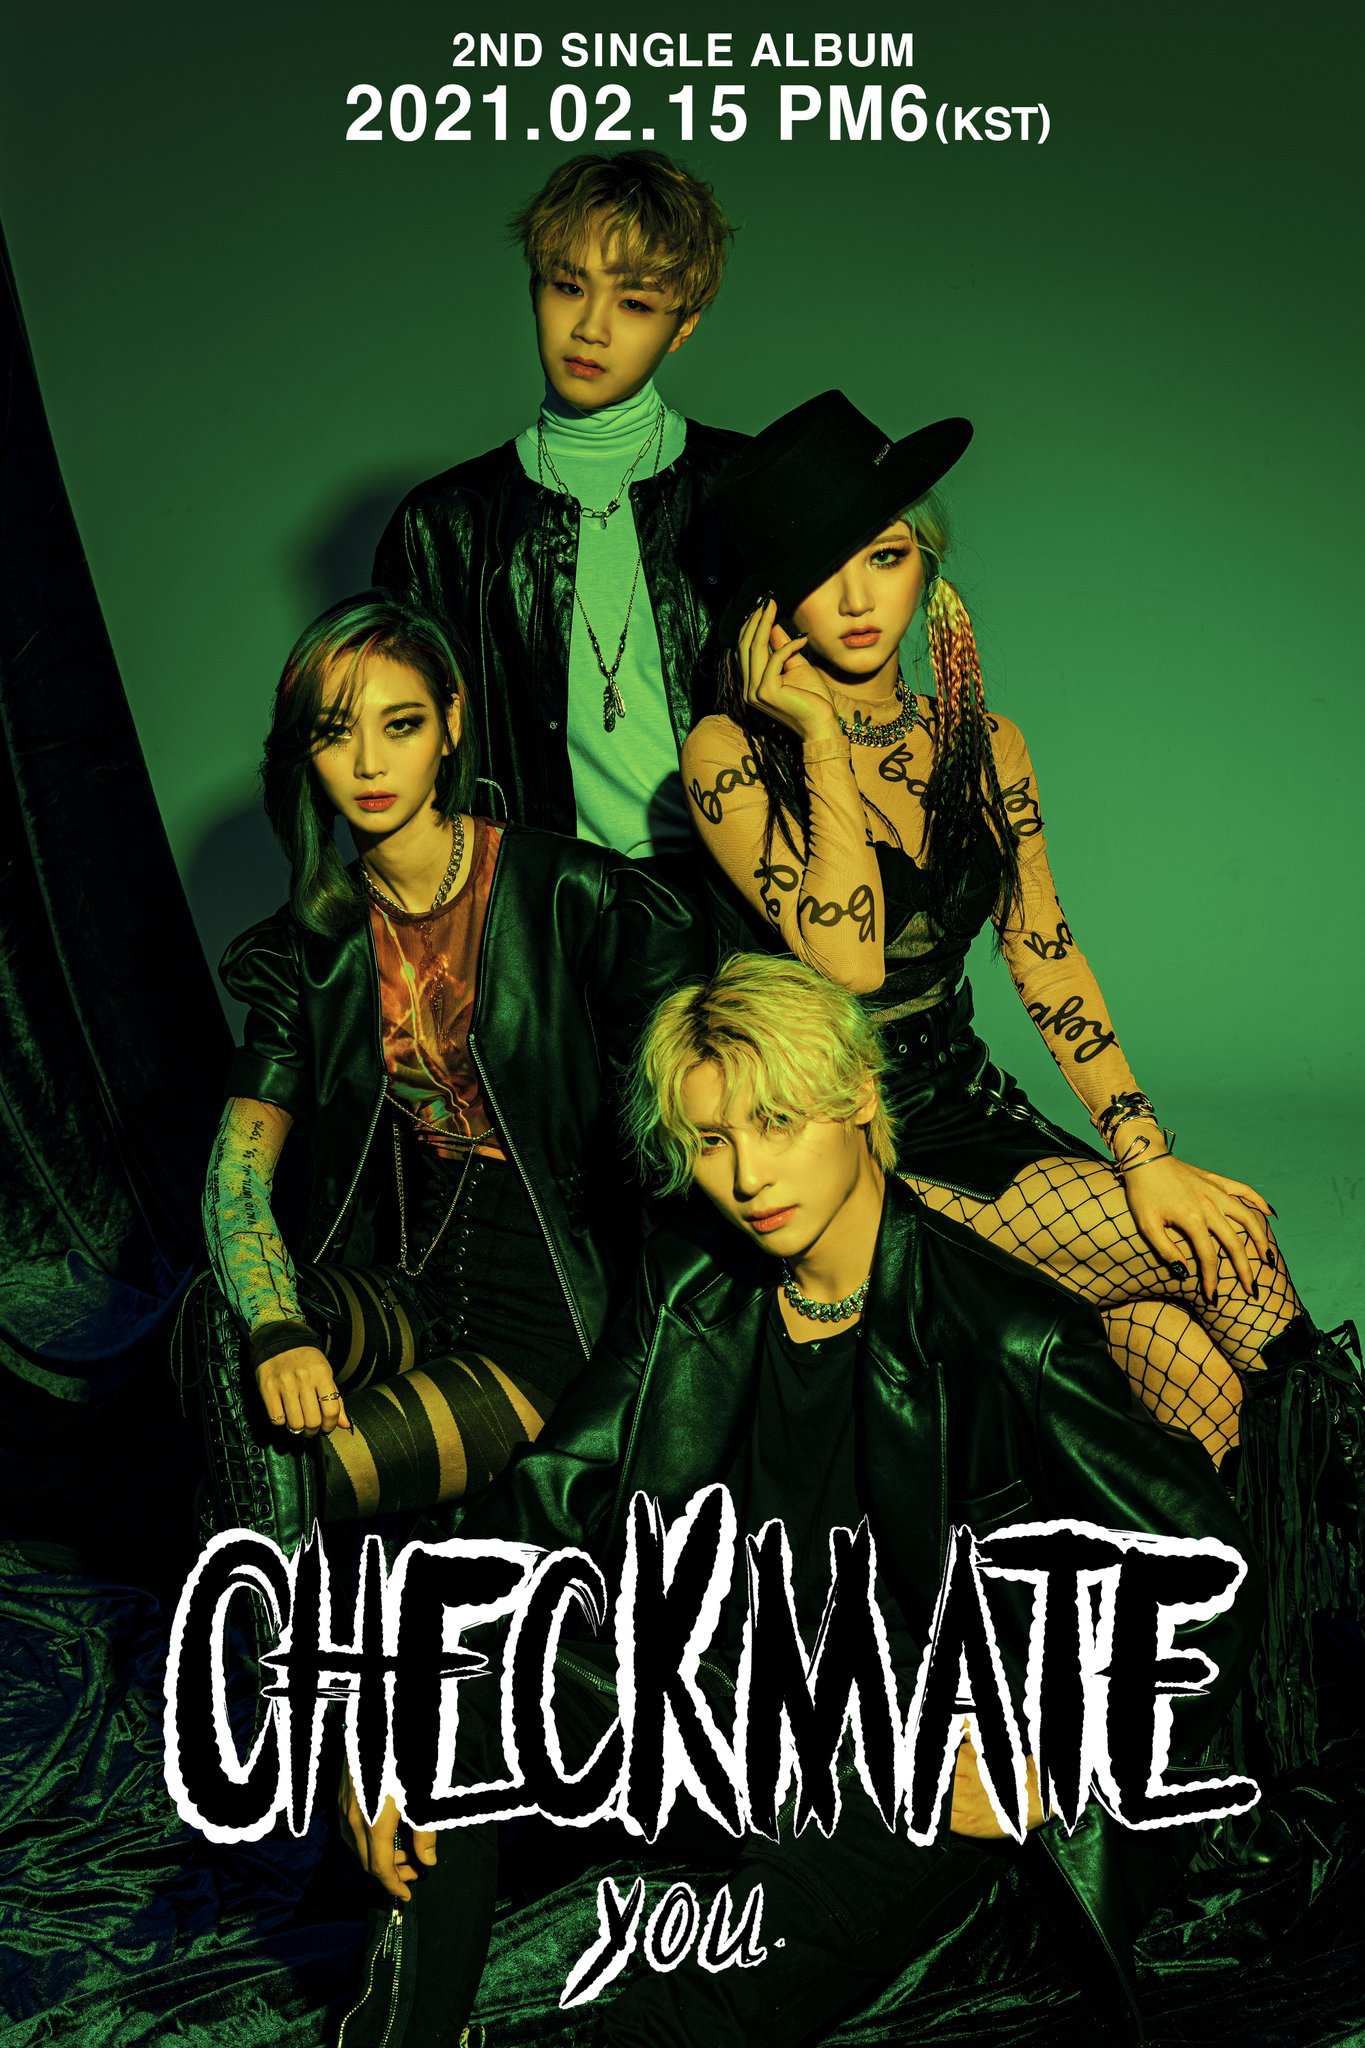 Checkmatenyc